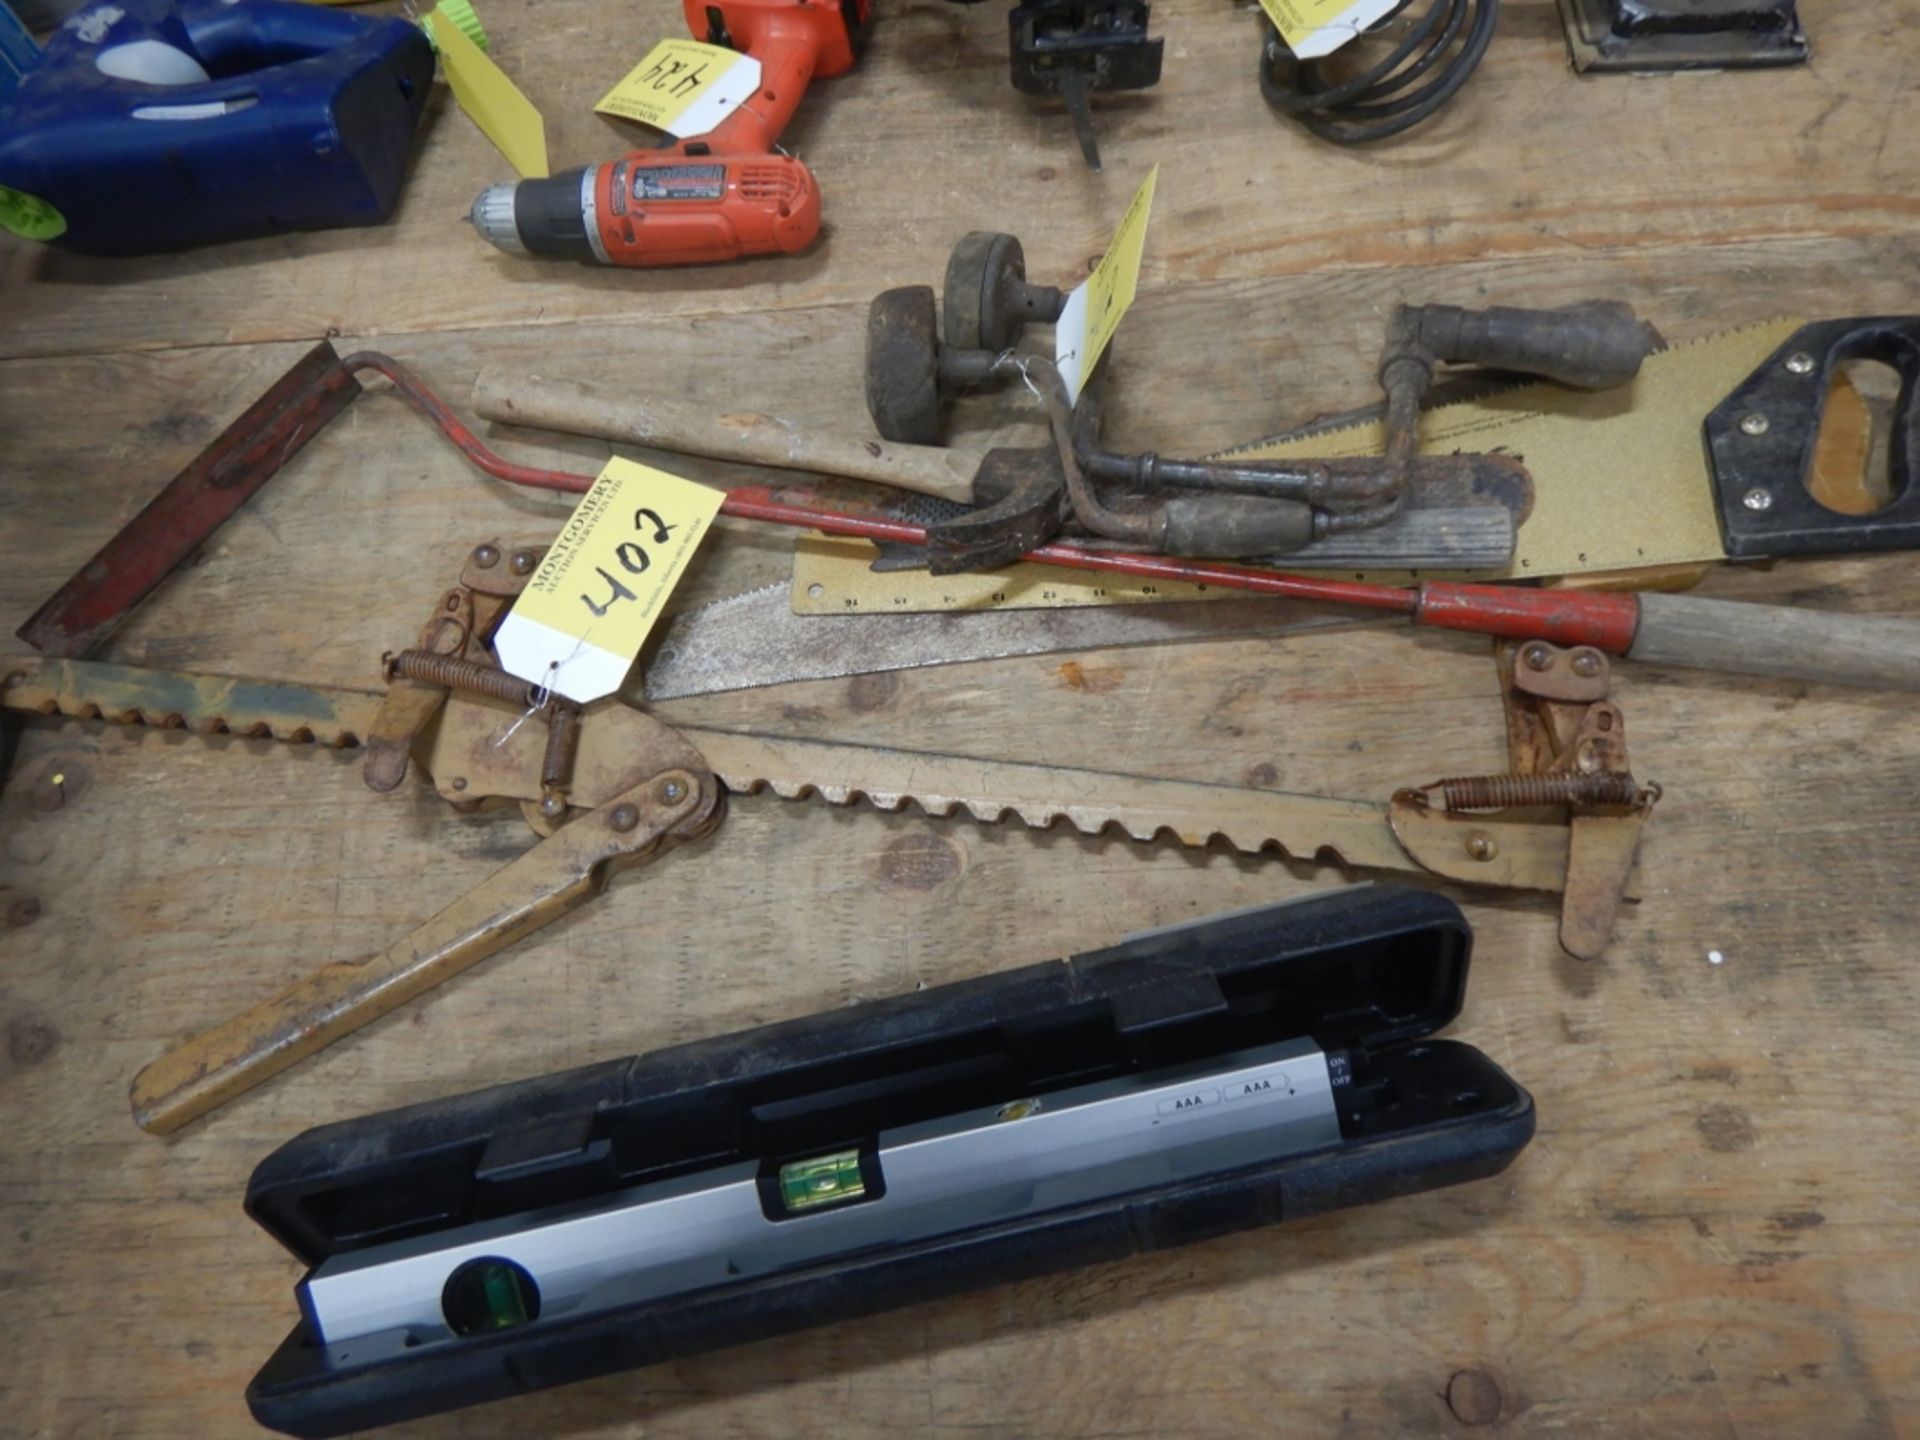 L/O ASSORTED HAND TOOLS, SAWS, POWER FIST LASER LEVEL, RASP, ETC.